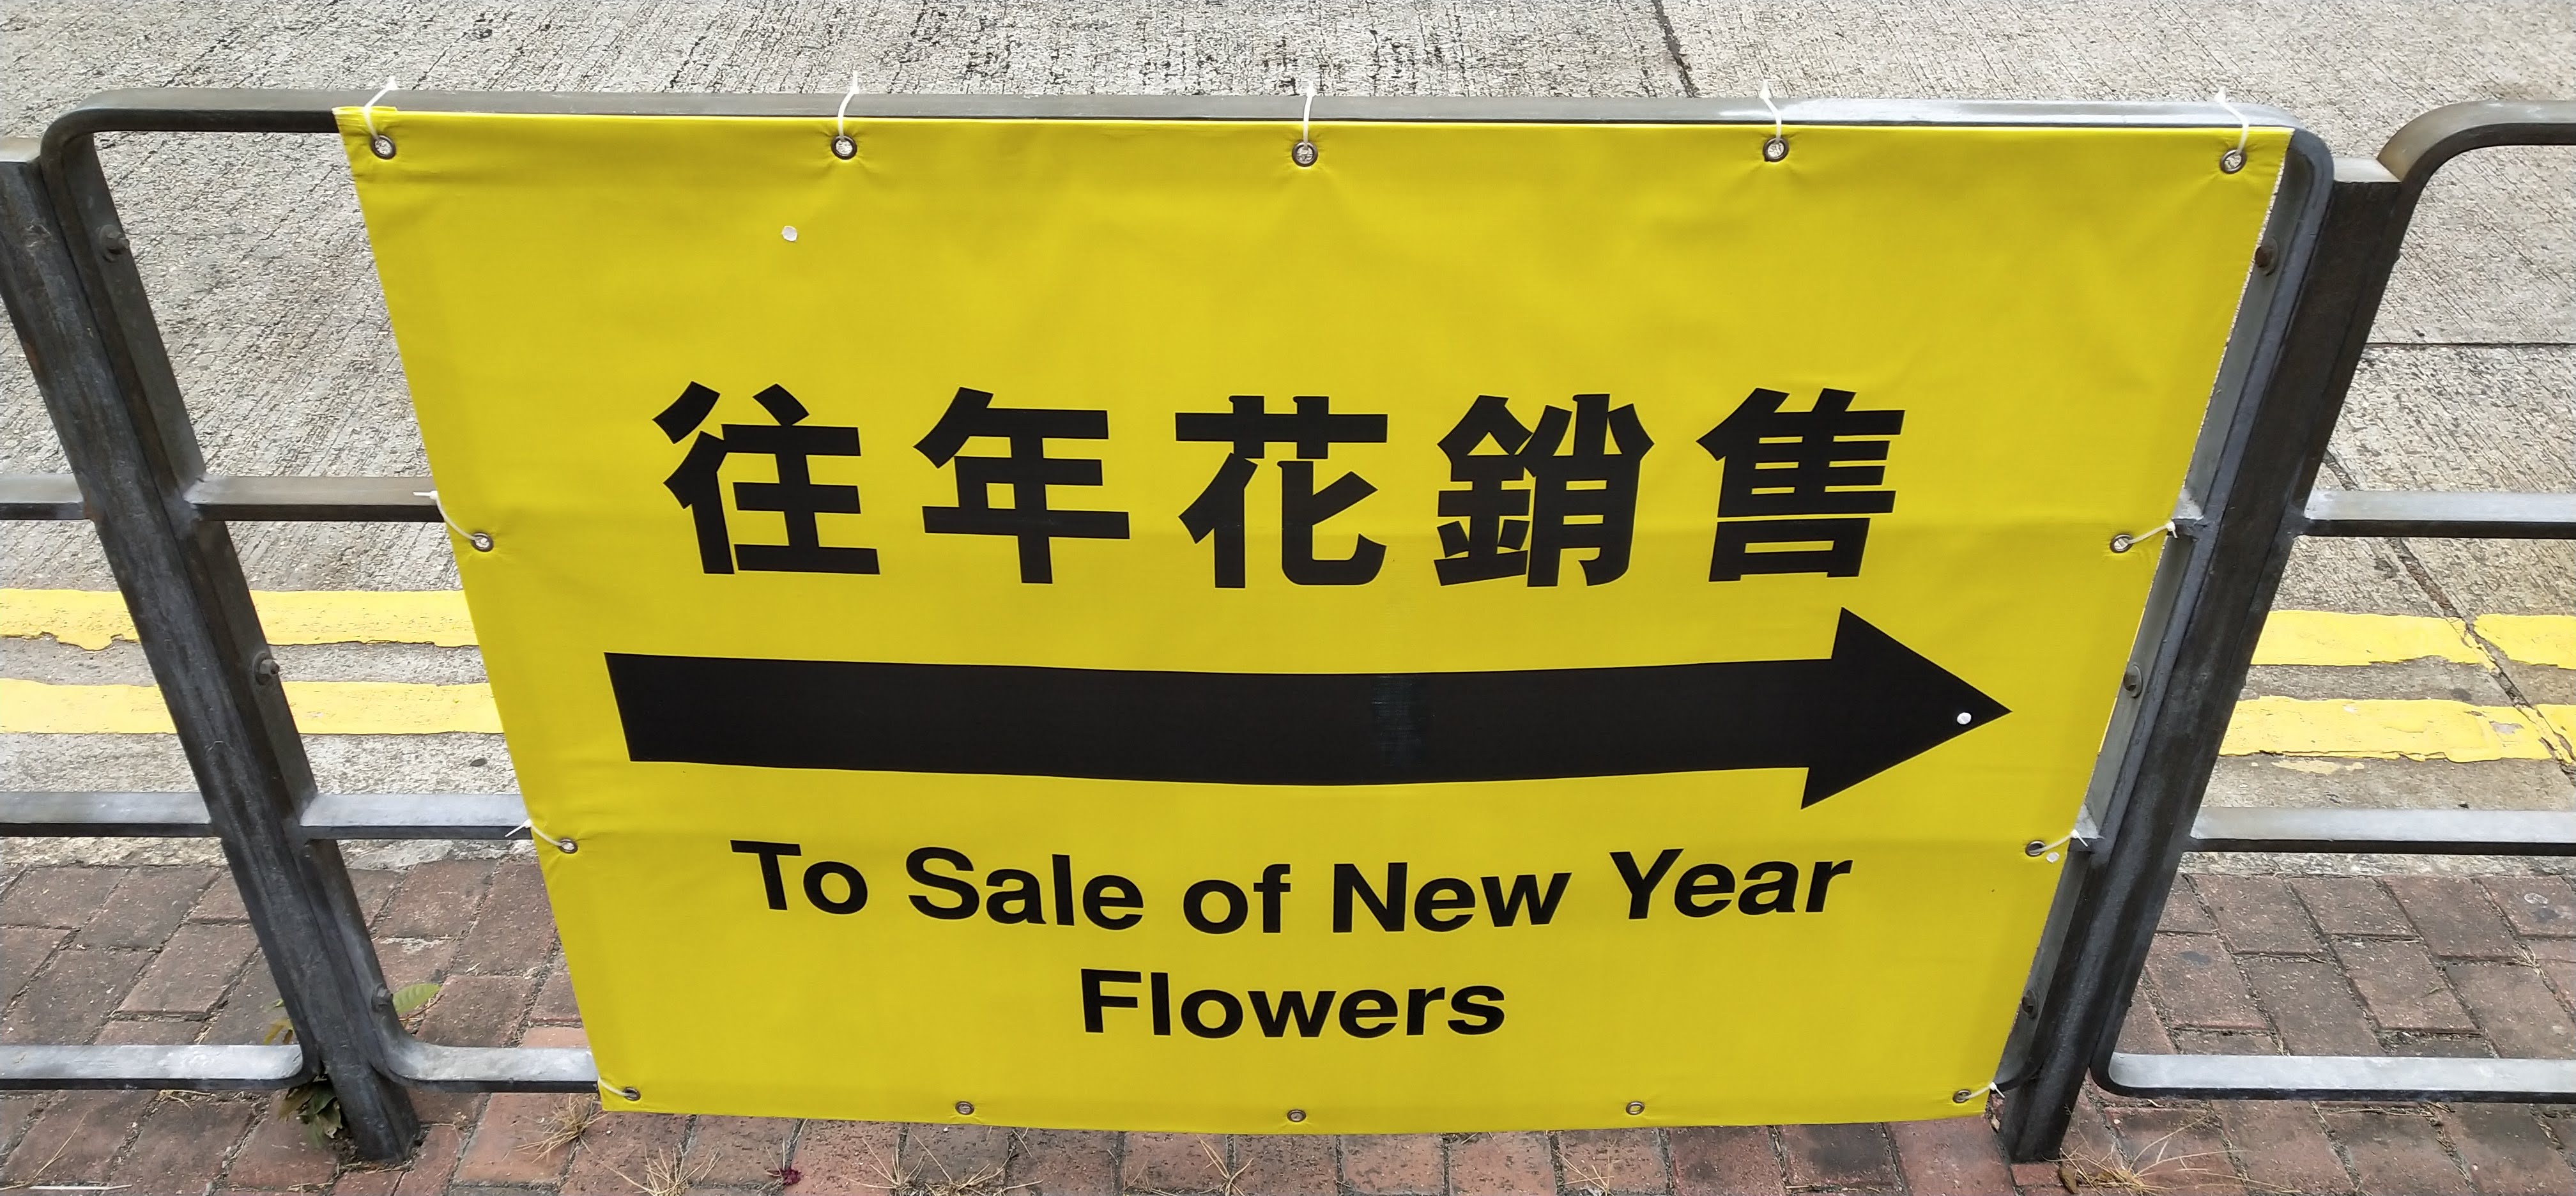 A Point of Sale of New Year Flowers in Hong Kong